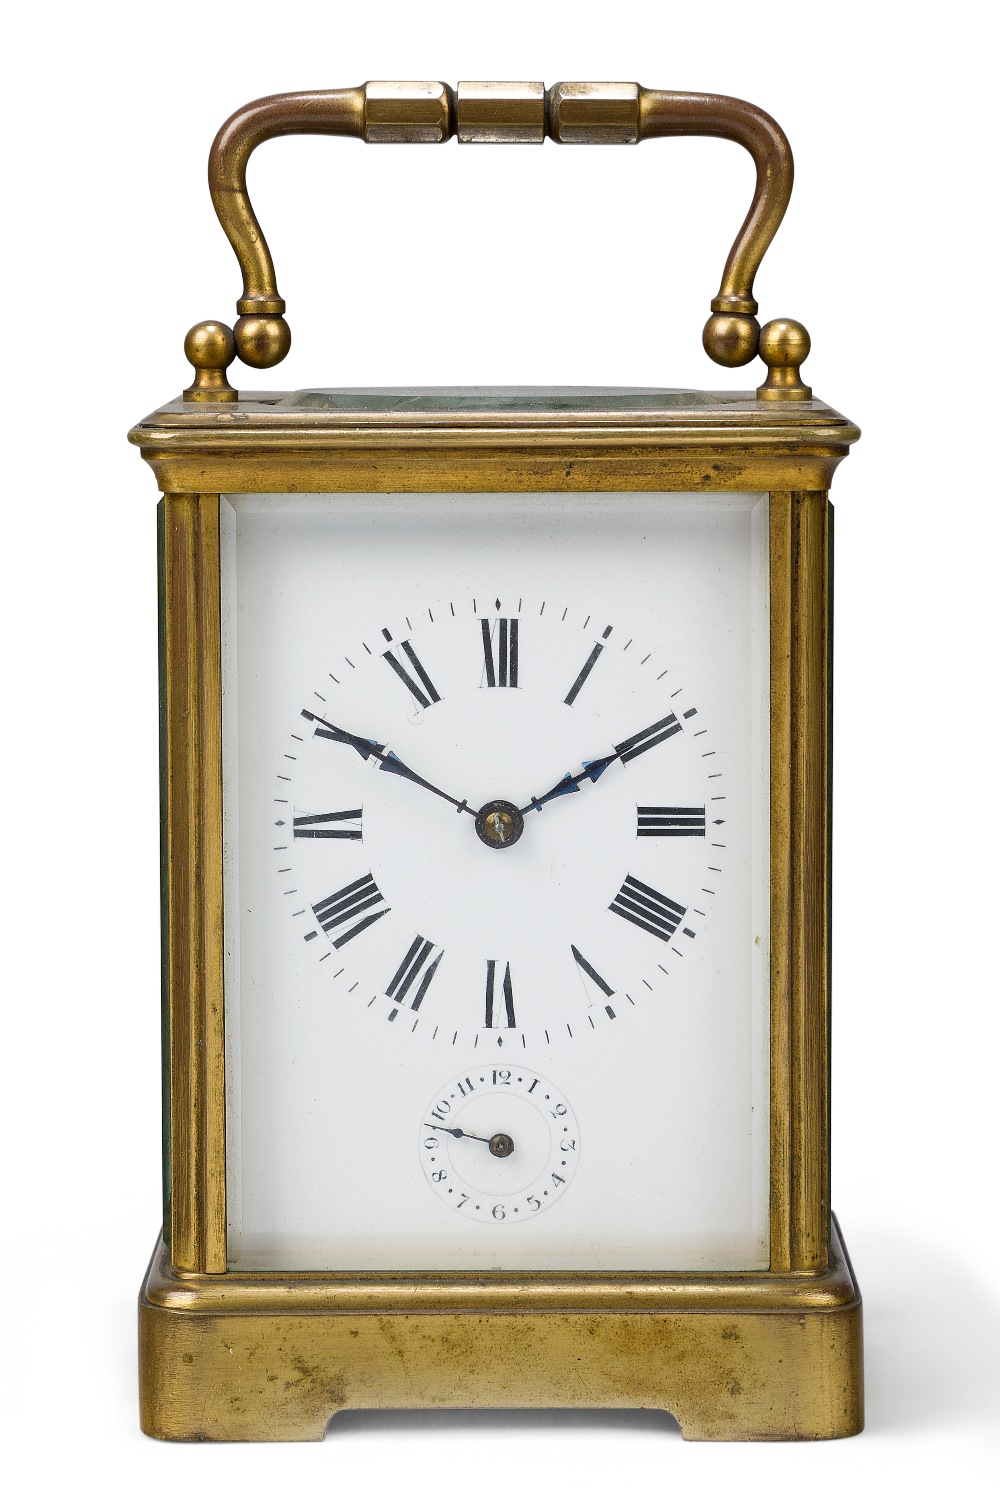 A French gilt-brass carriage clock, late 19th century, the corniche case with swing handle, the